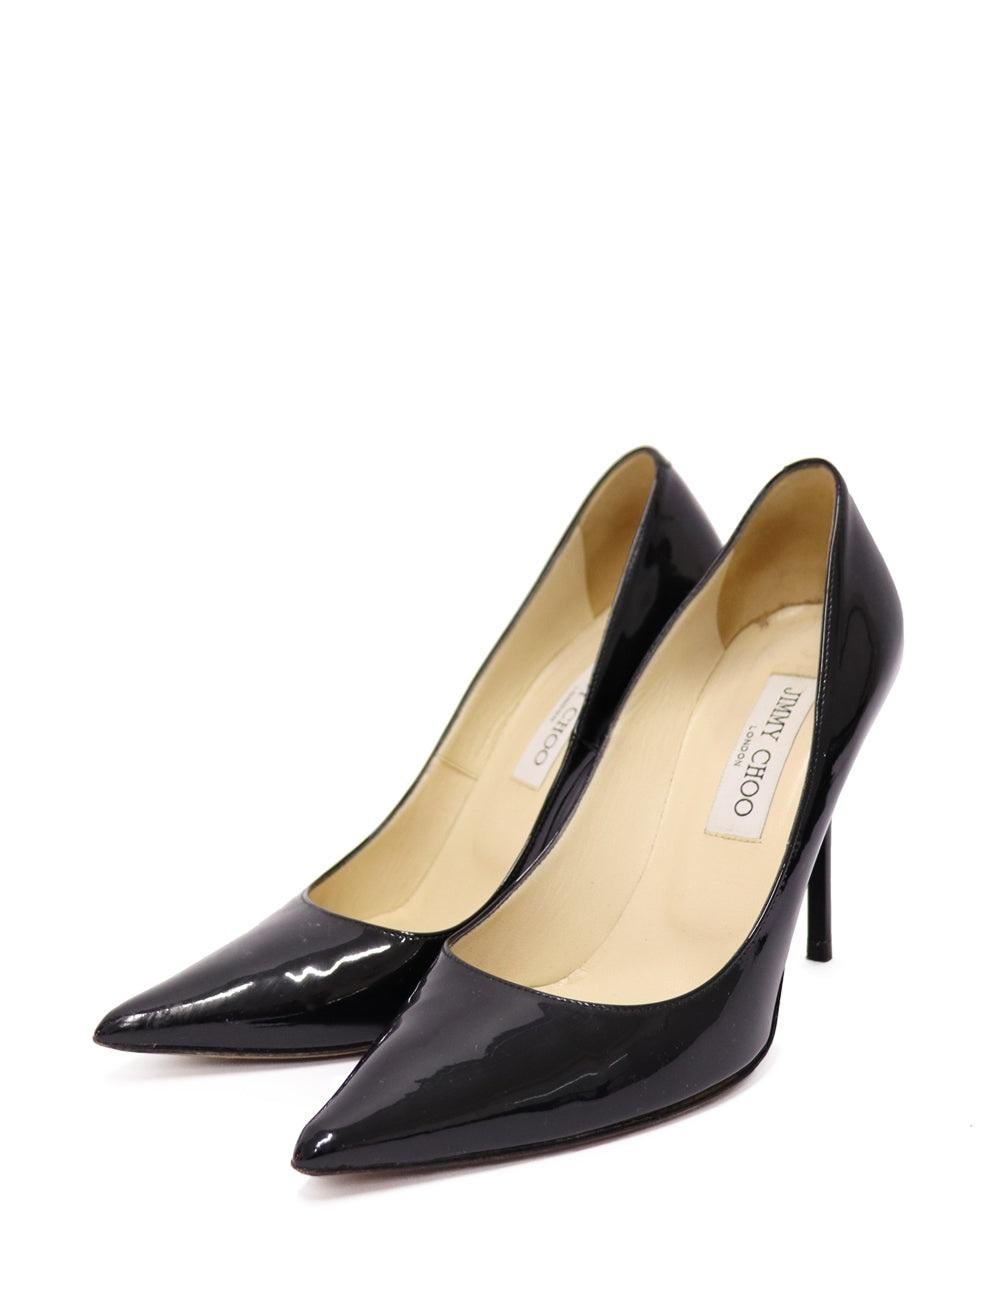 Jimmy Choo Romy 100 Black patent leather Pointy Toe pumps. The ever-classic Romy heel is updated for the new season in black patent. Leather lined with a leather sole, the 100mm heel height provides a leg-lengthening punch. Complement your evening